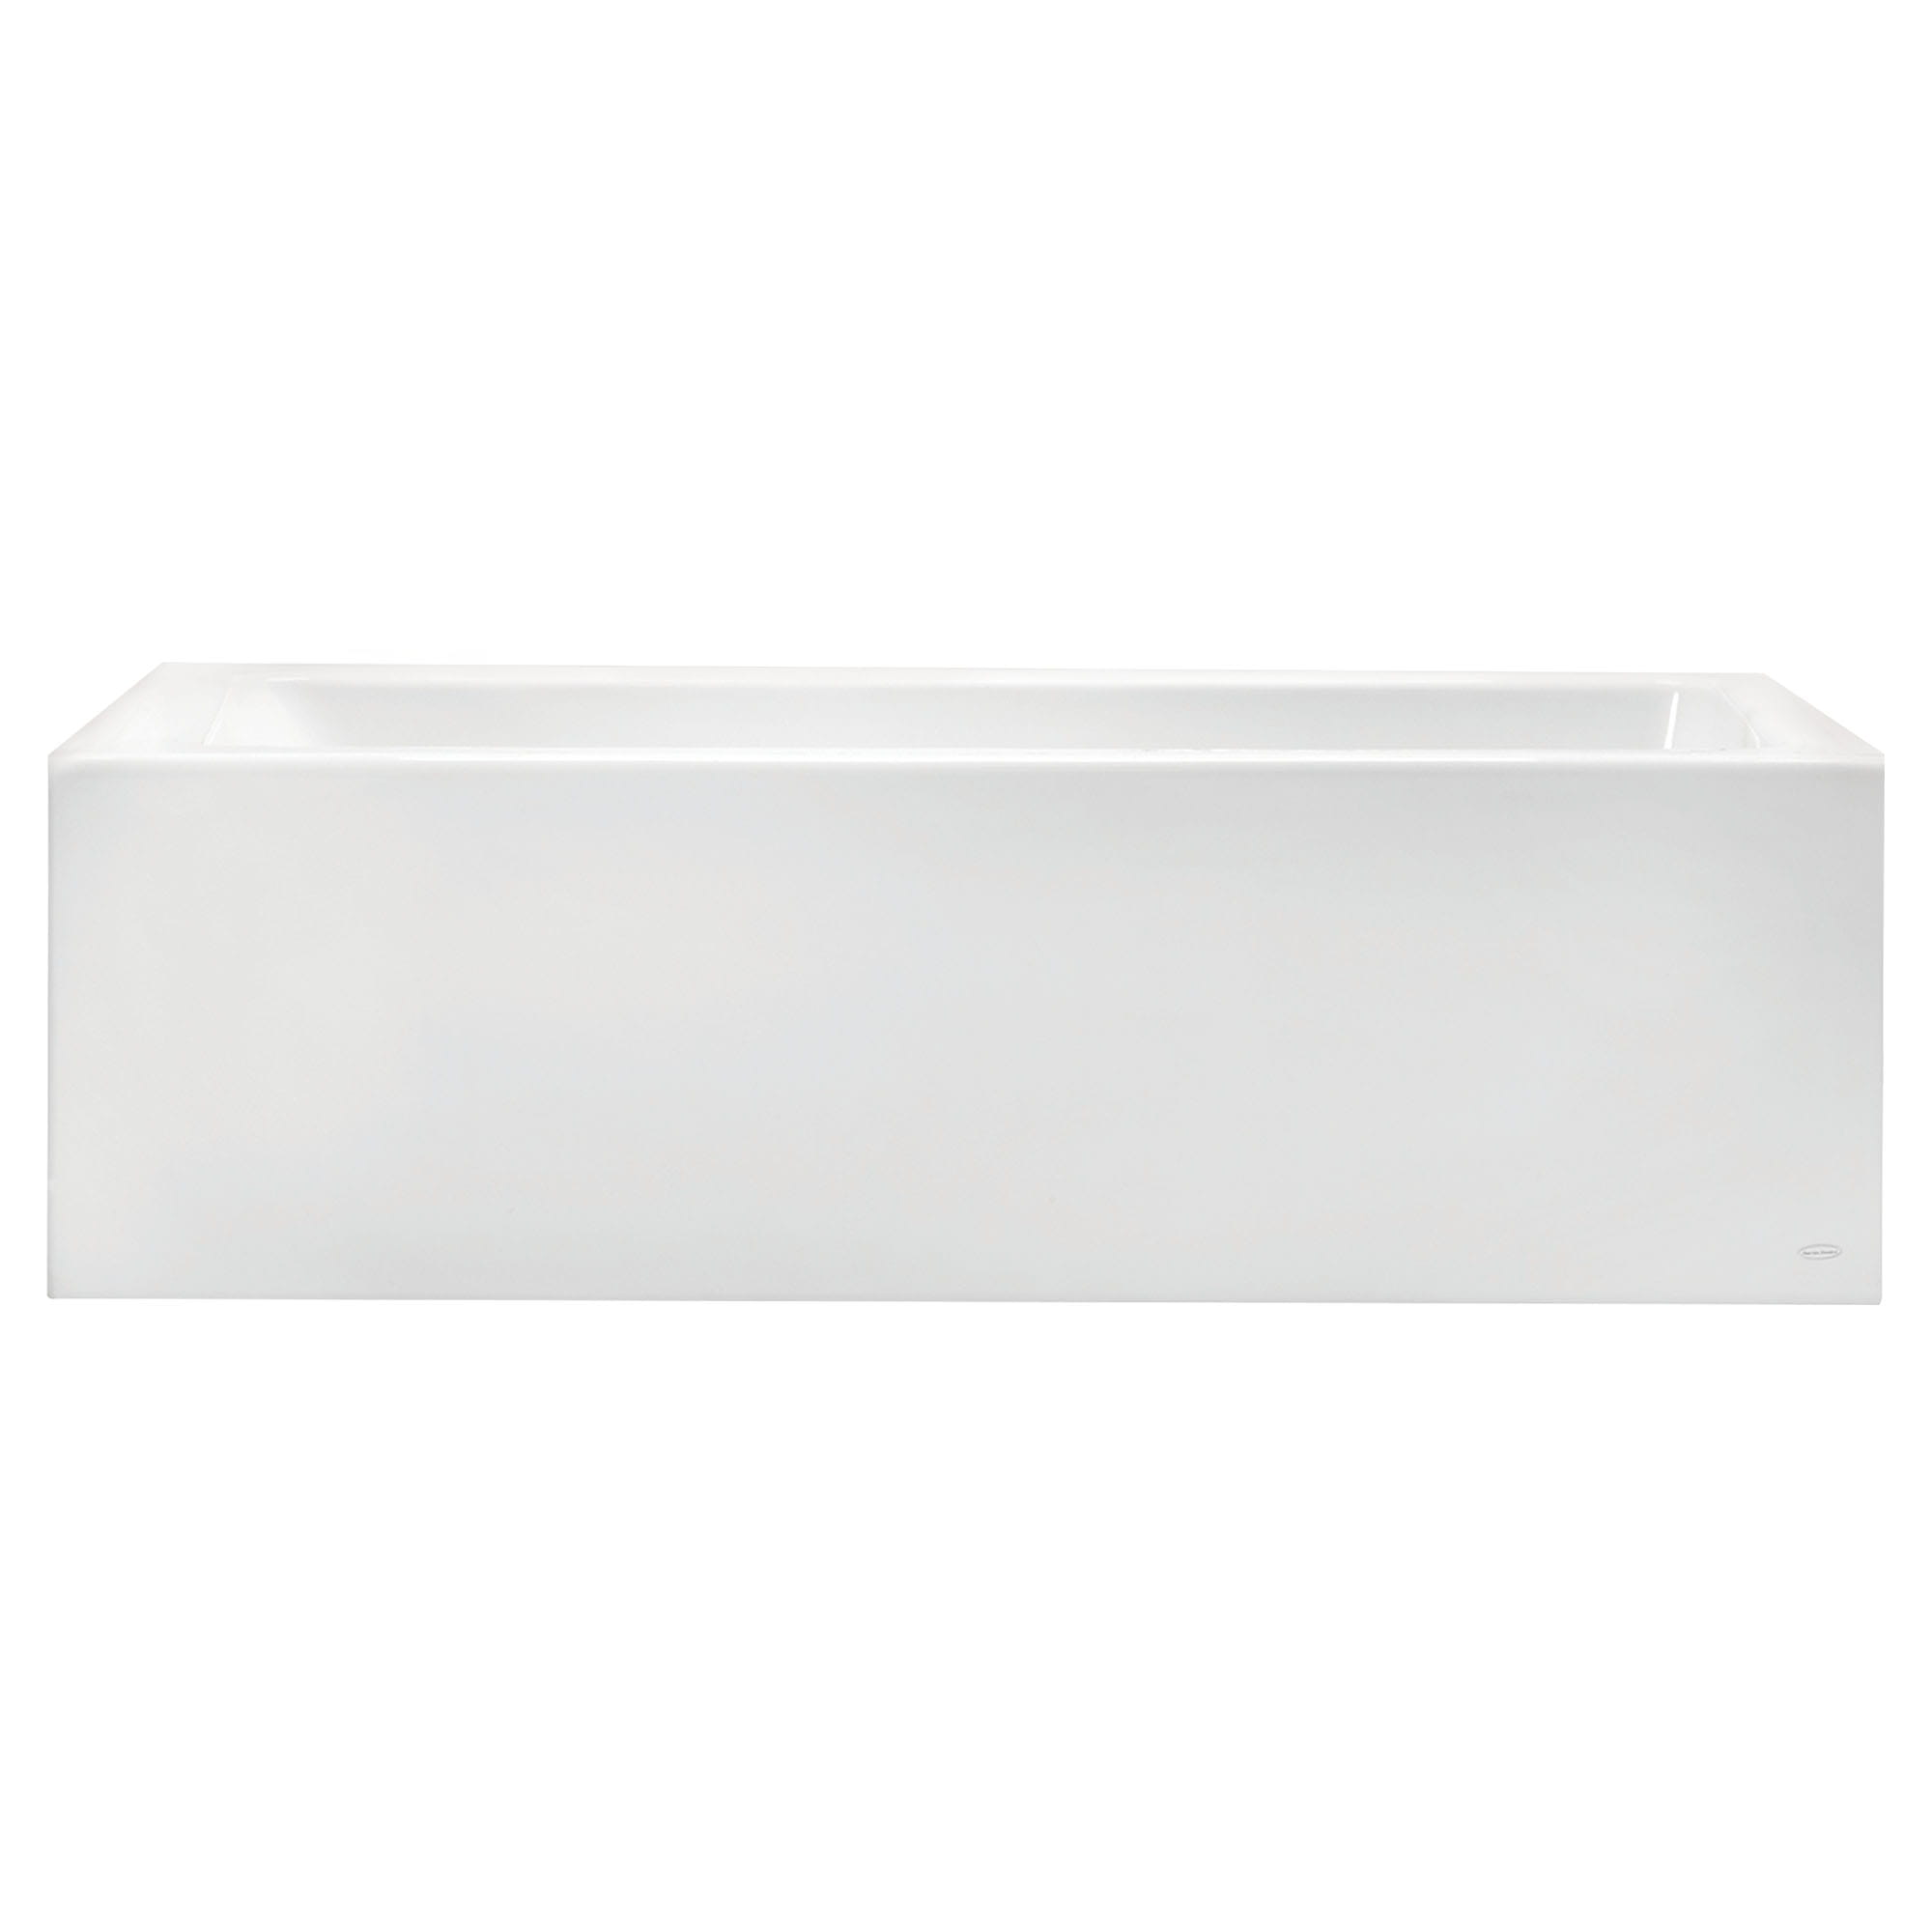 Studio 60 x 30 Inch Integral Apron Bathtub Above Floor Rough with Right Hand Outlet WHITE